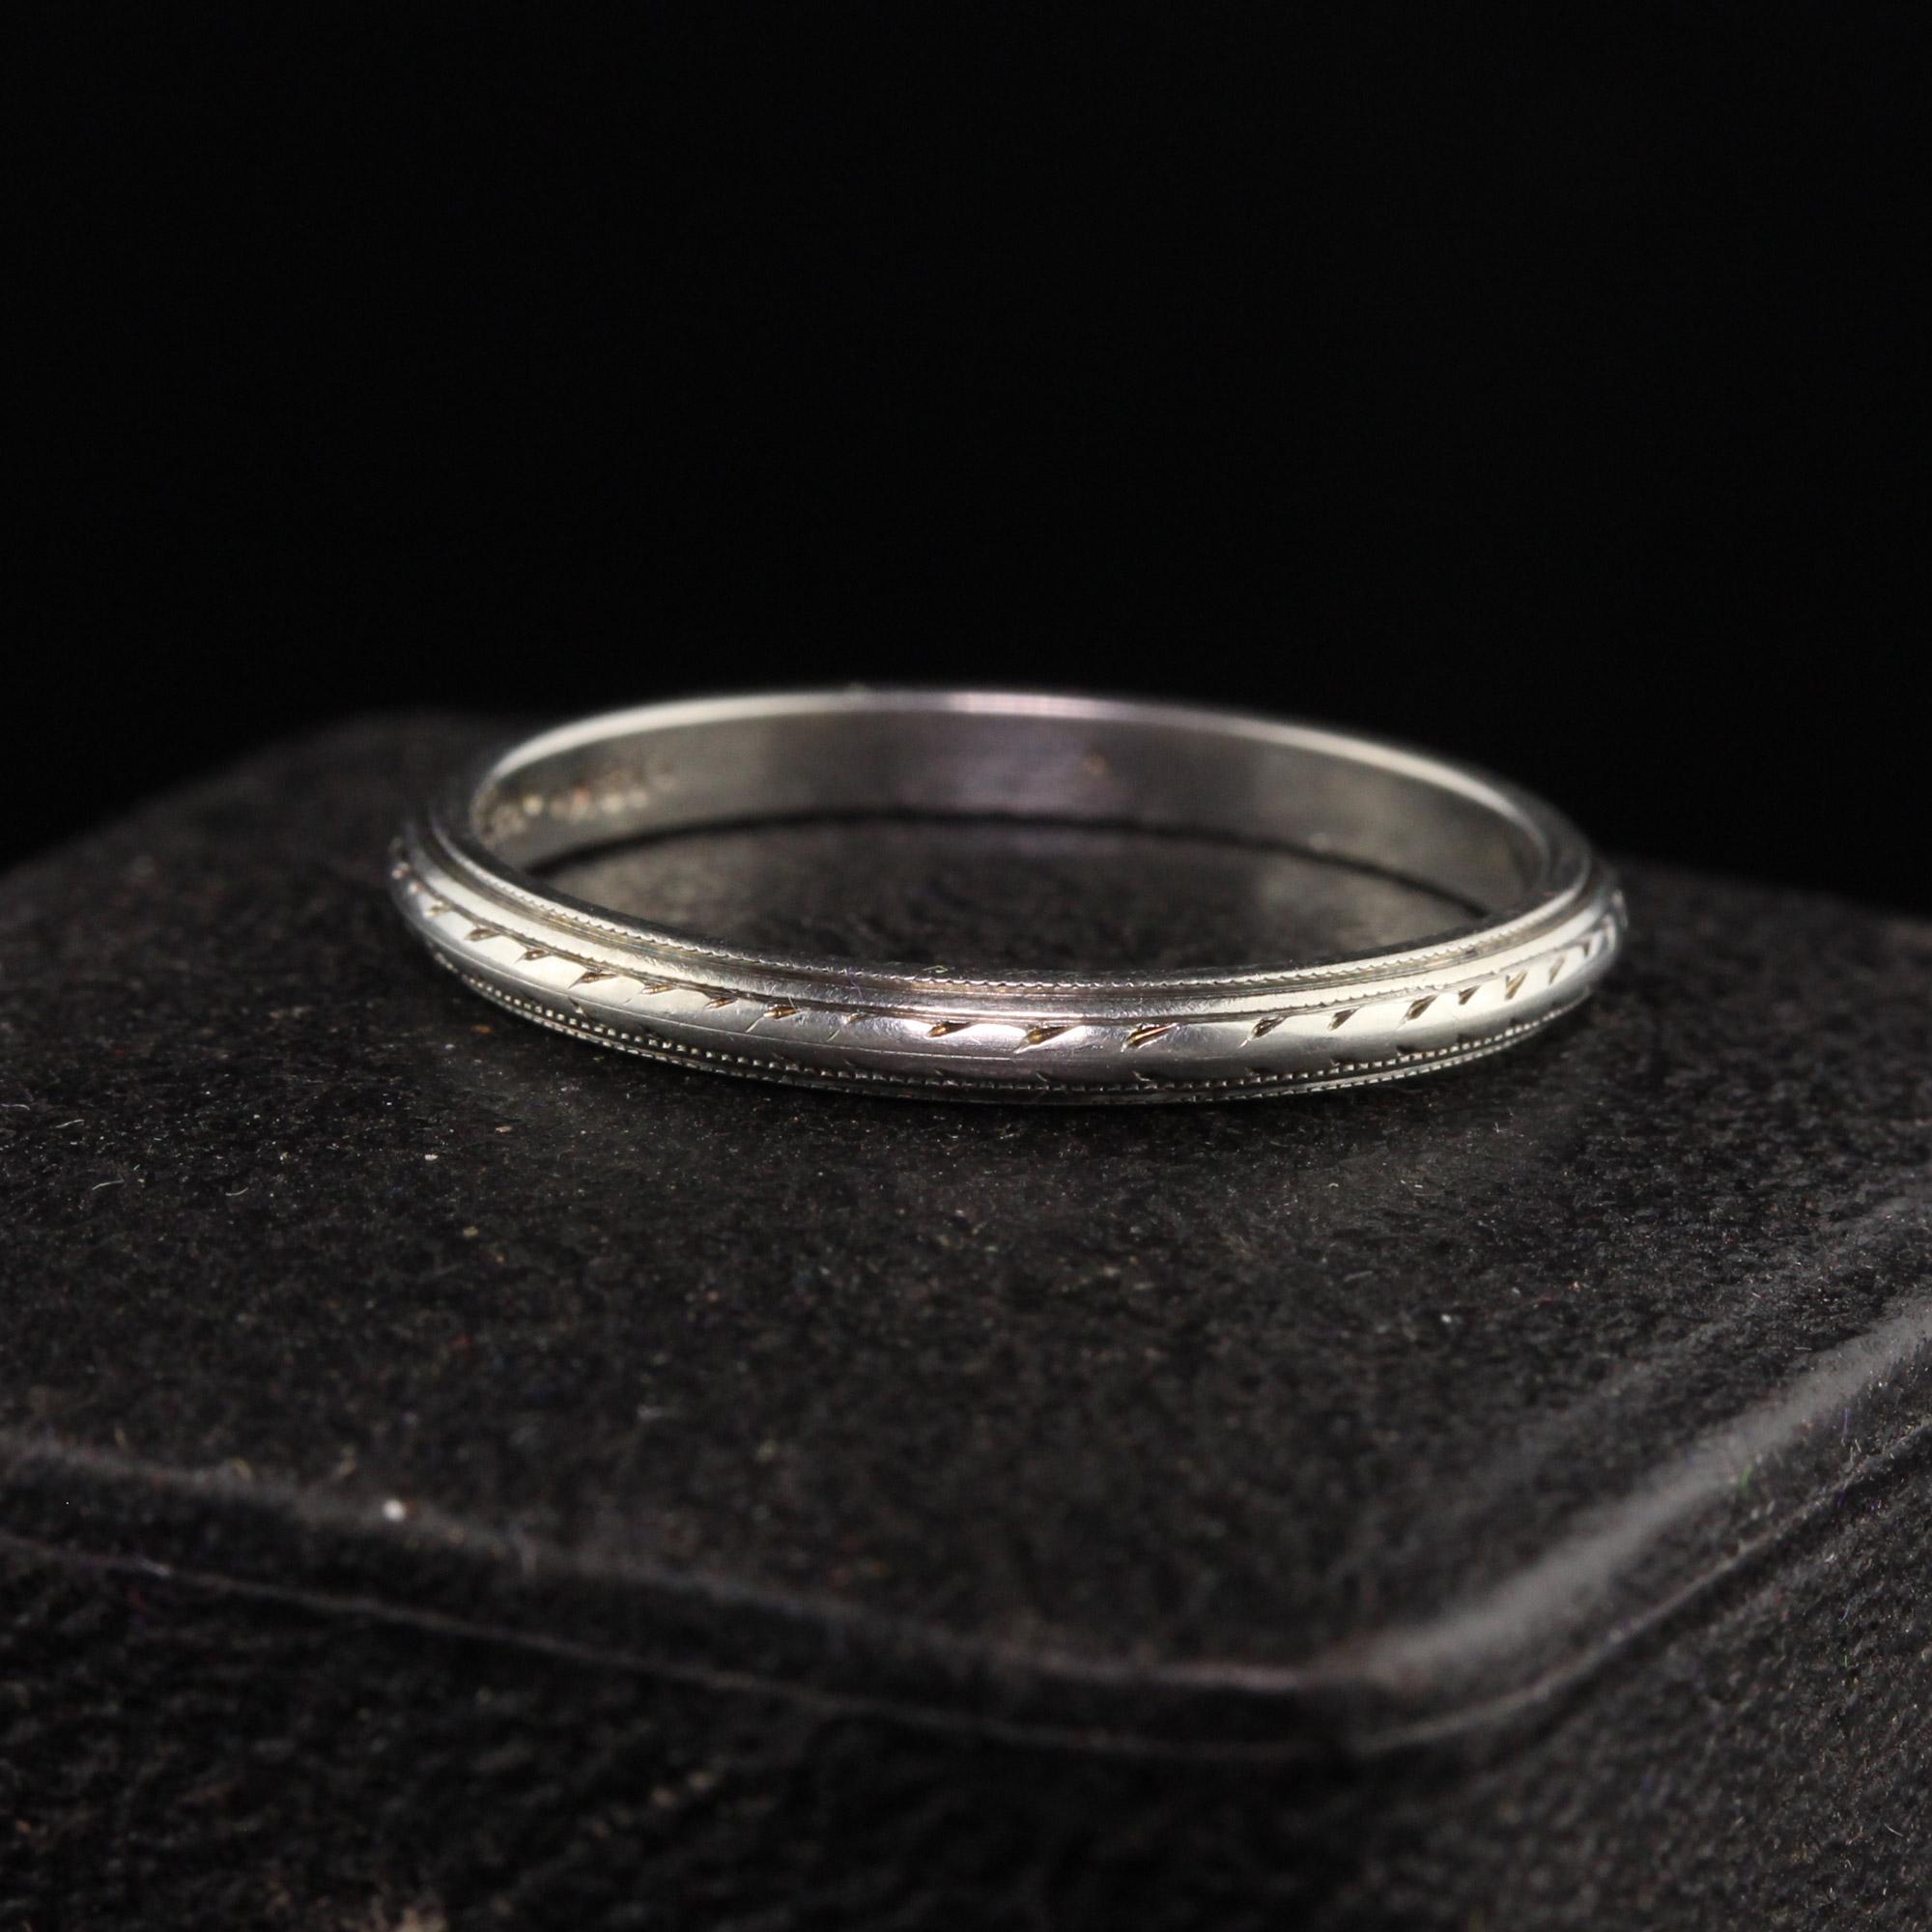 Beautiful Antique Art Deco 18K White Gold Engraved Wedding Band - Size 6. This beautiful wedding band is crafted in 18k white gold. The band is nicely engraved around the entire ring and is in good condition.

Item #R1267

Metal: 18K White